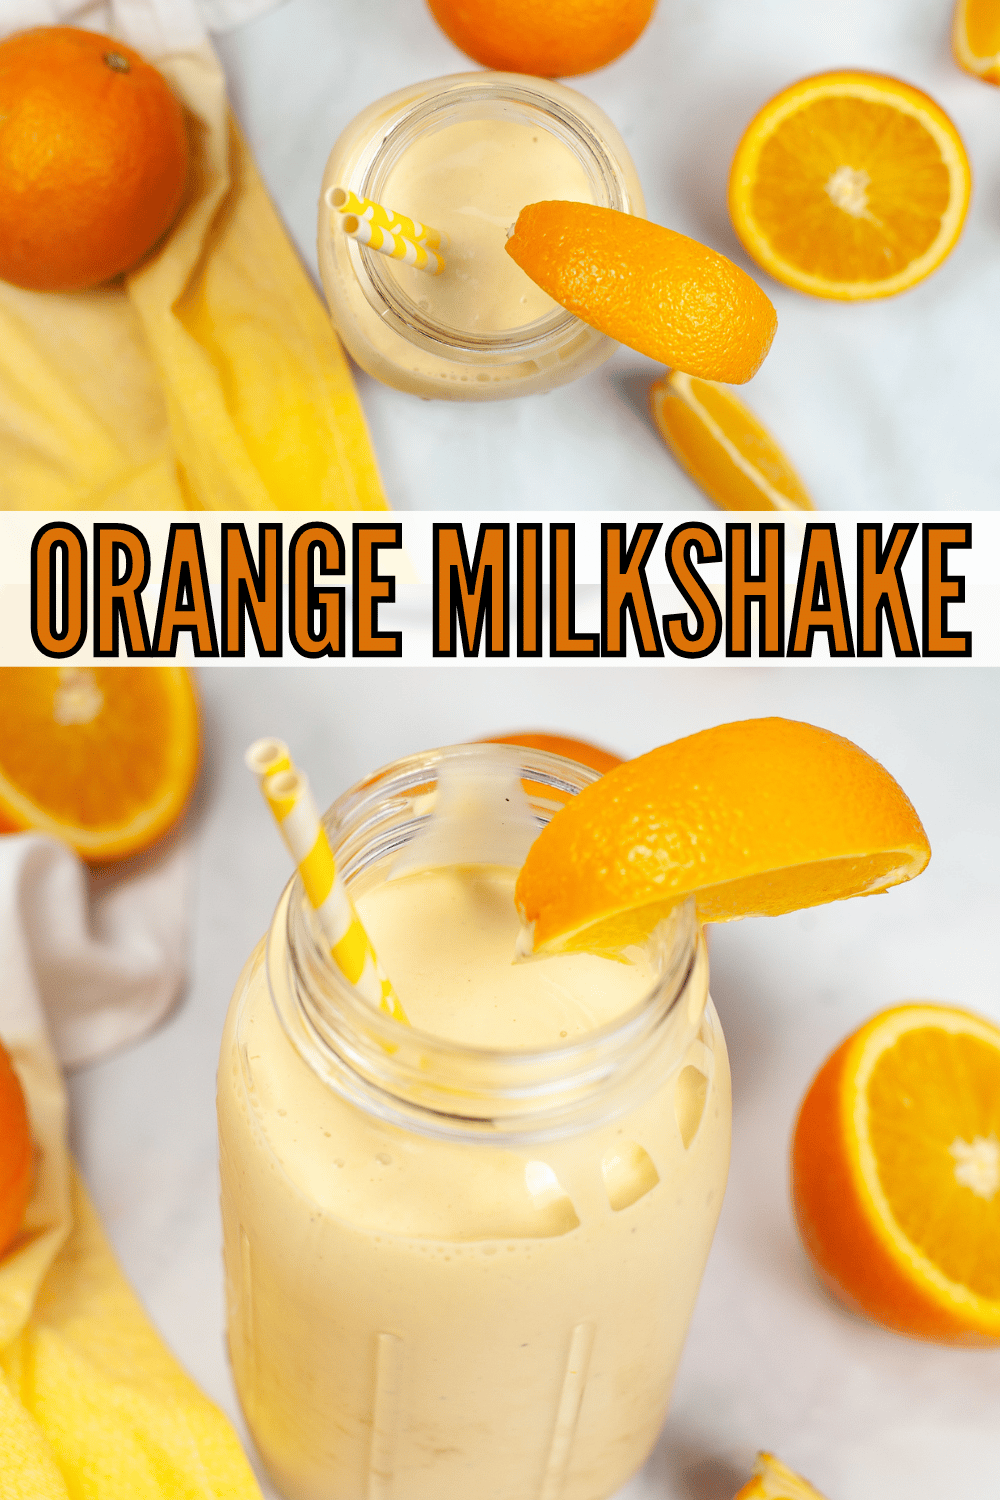 This Orange Milkshake is so delicious and refreshing. It’s perfect for summertime or any time you need a little pick-me-up! #orangemilkshake #orangecreamsicleshake #orangecreamshake #orangecreamsiclemilkshake via @wondermomwannab